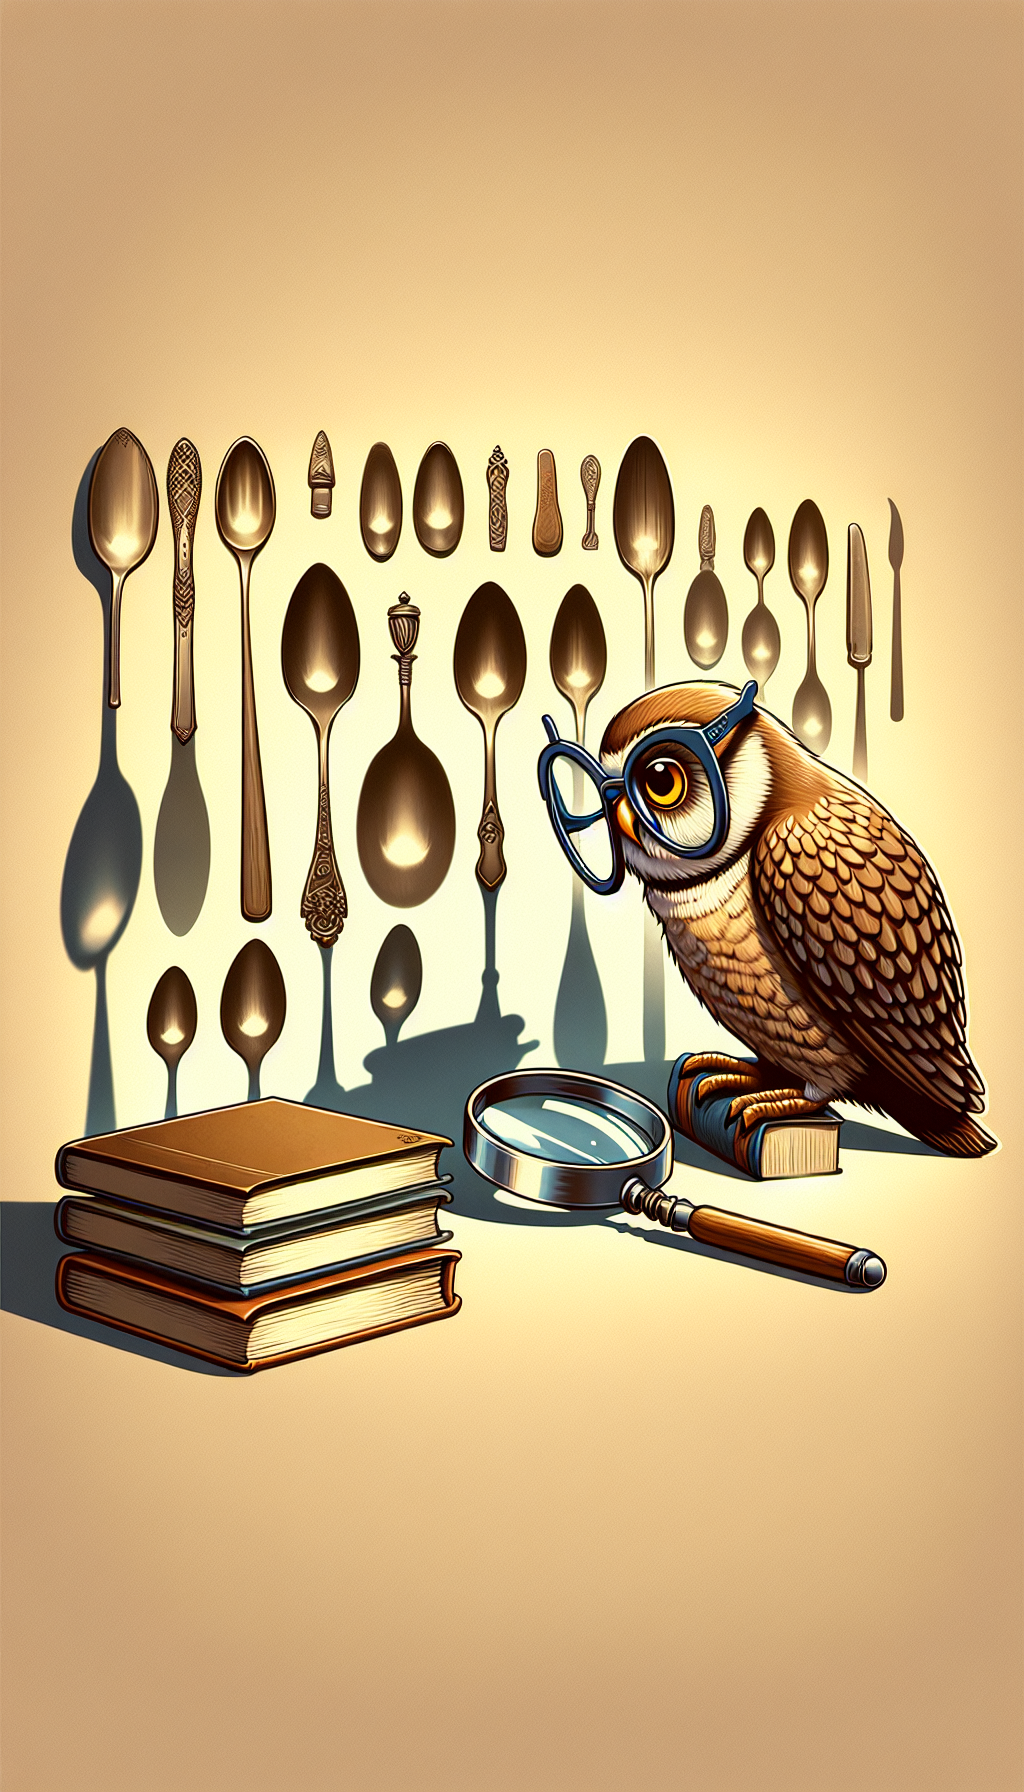 A whimsical illustration depicts an animated, bespectacled owl perched atop a stack of history tomes, peering through a magnifying glass at a collection of variously styled antique spoons arrayed below. Each spoon casts a shadow that morphs into an iconic symbol from its era, subtly suggesting the fusion of past and present in the quest for identification.